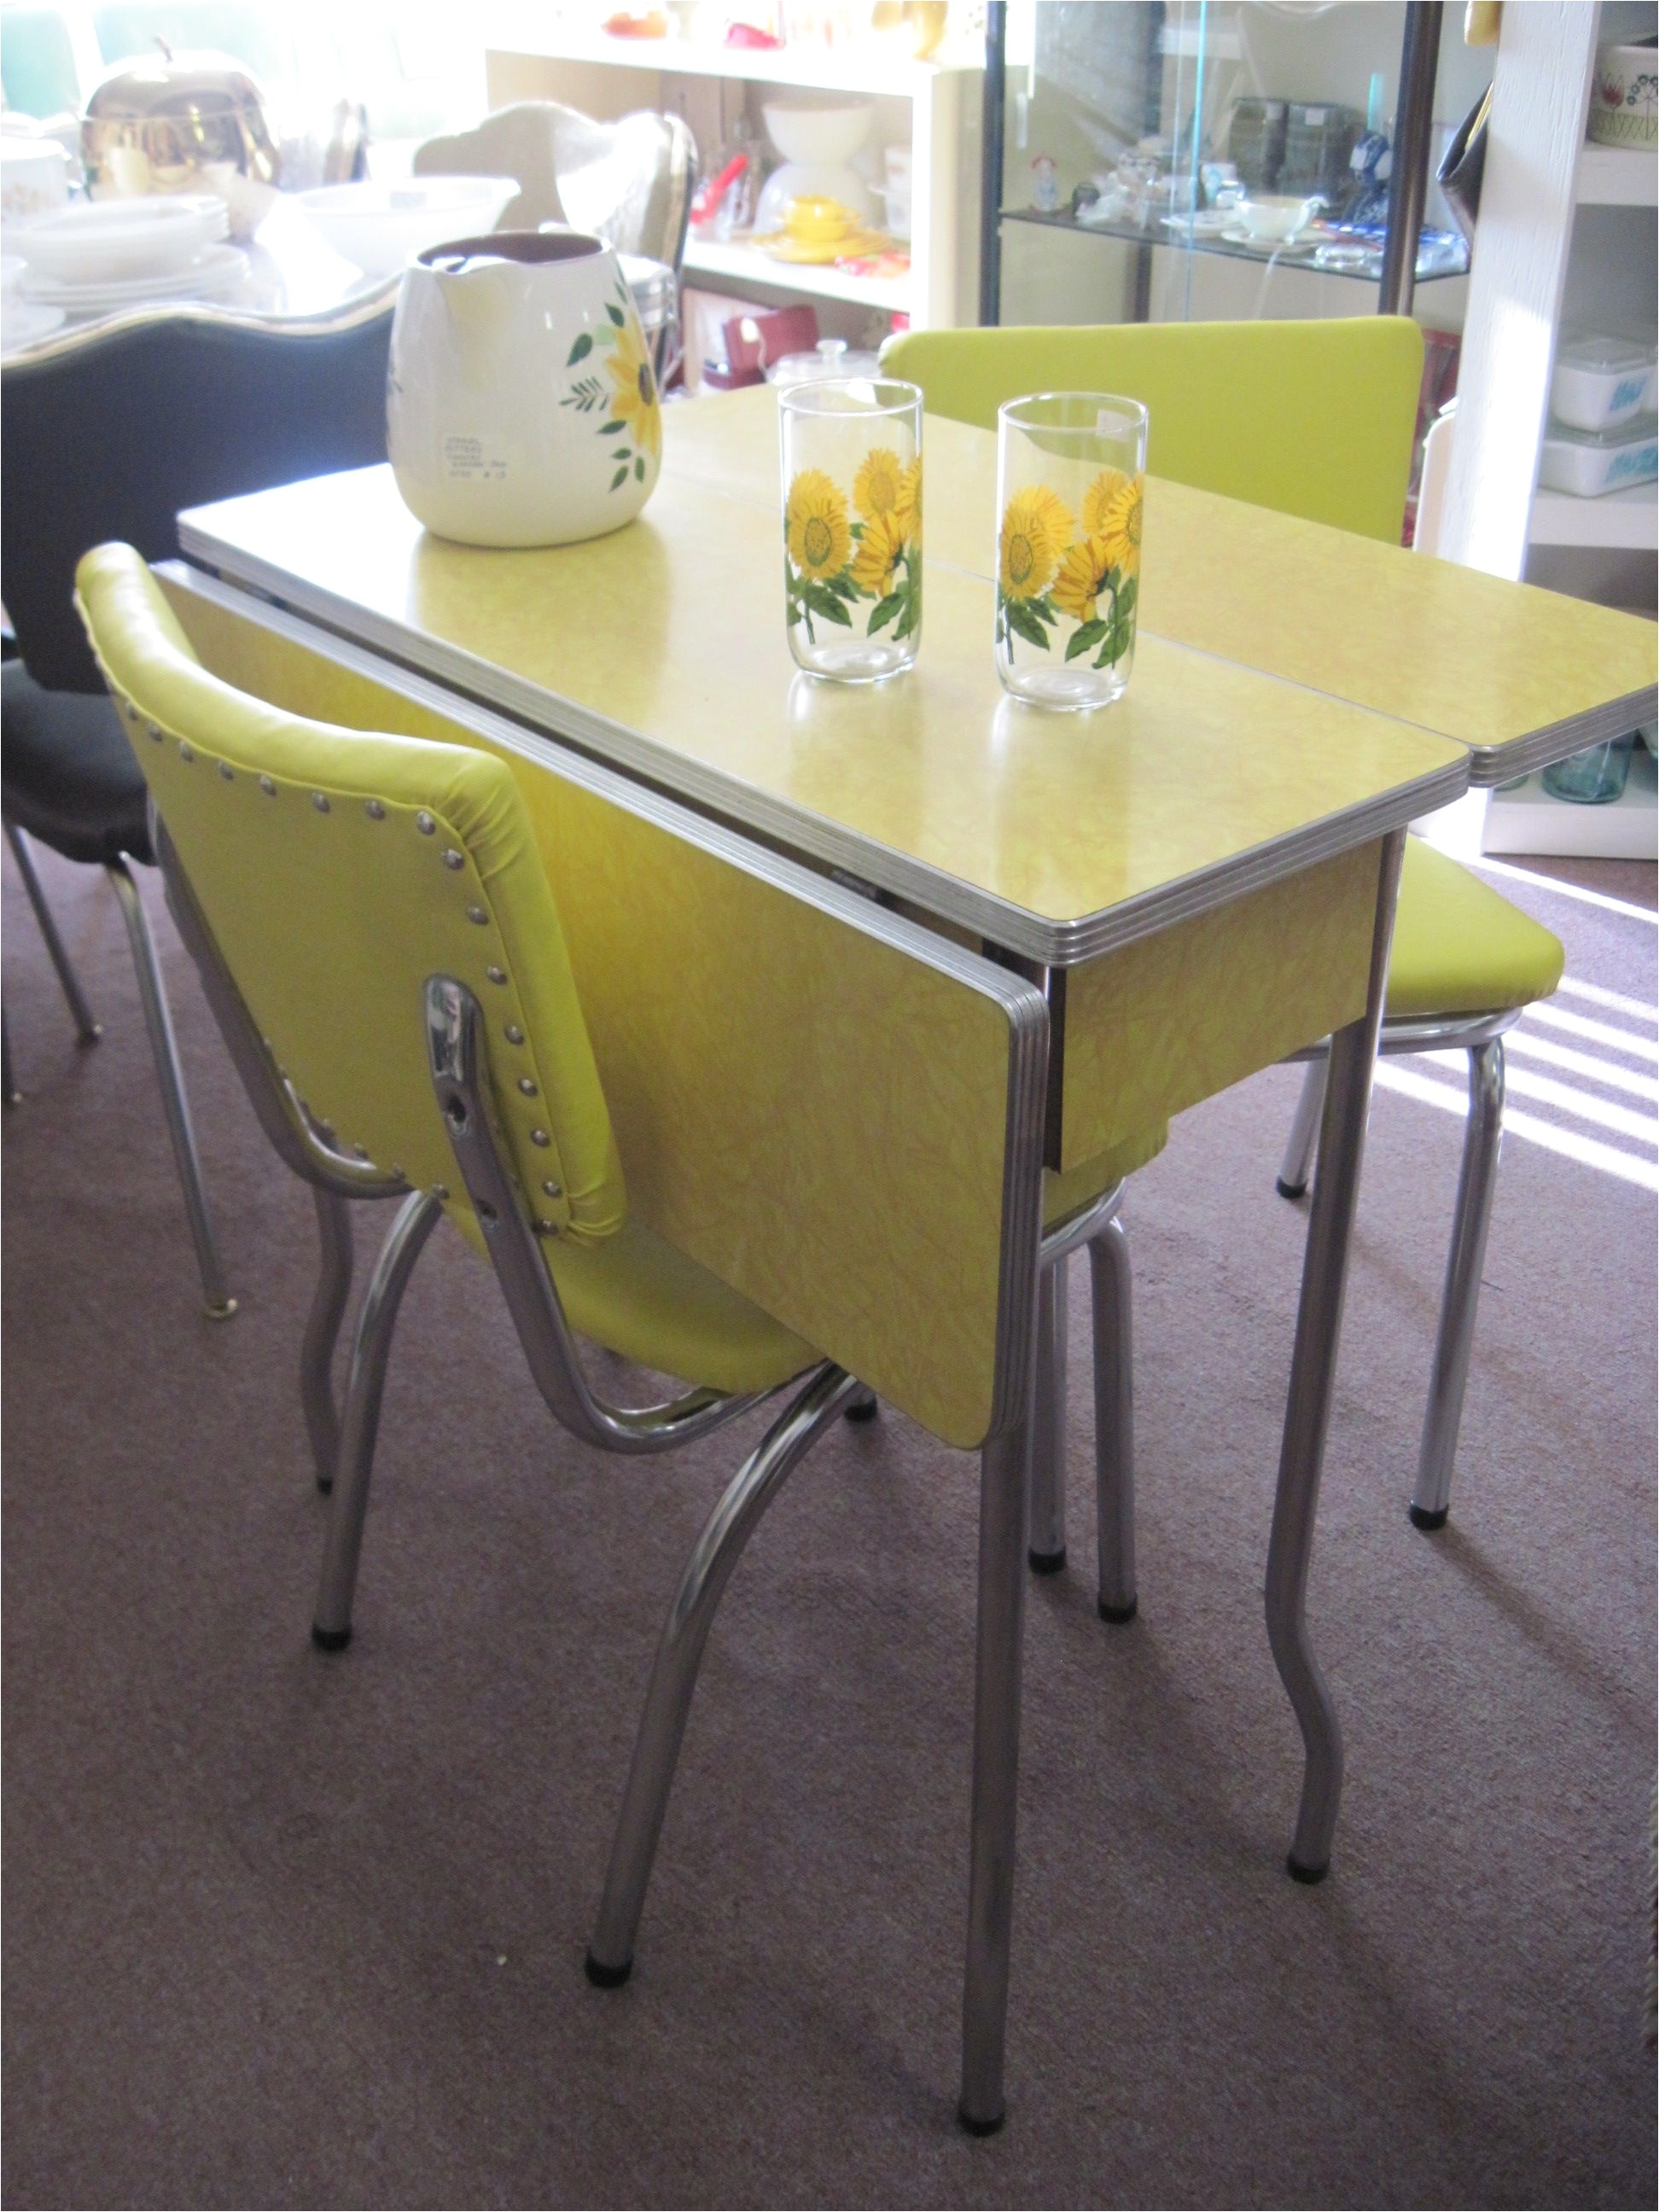 Formica Kitchen Table and Chairs for Sale Fetching Retro Kitchen Tables within 1950 formica Table and Chairs